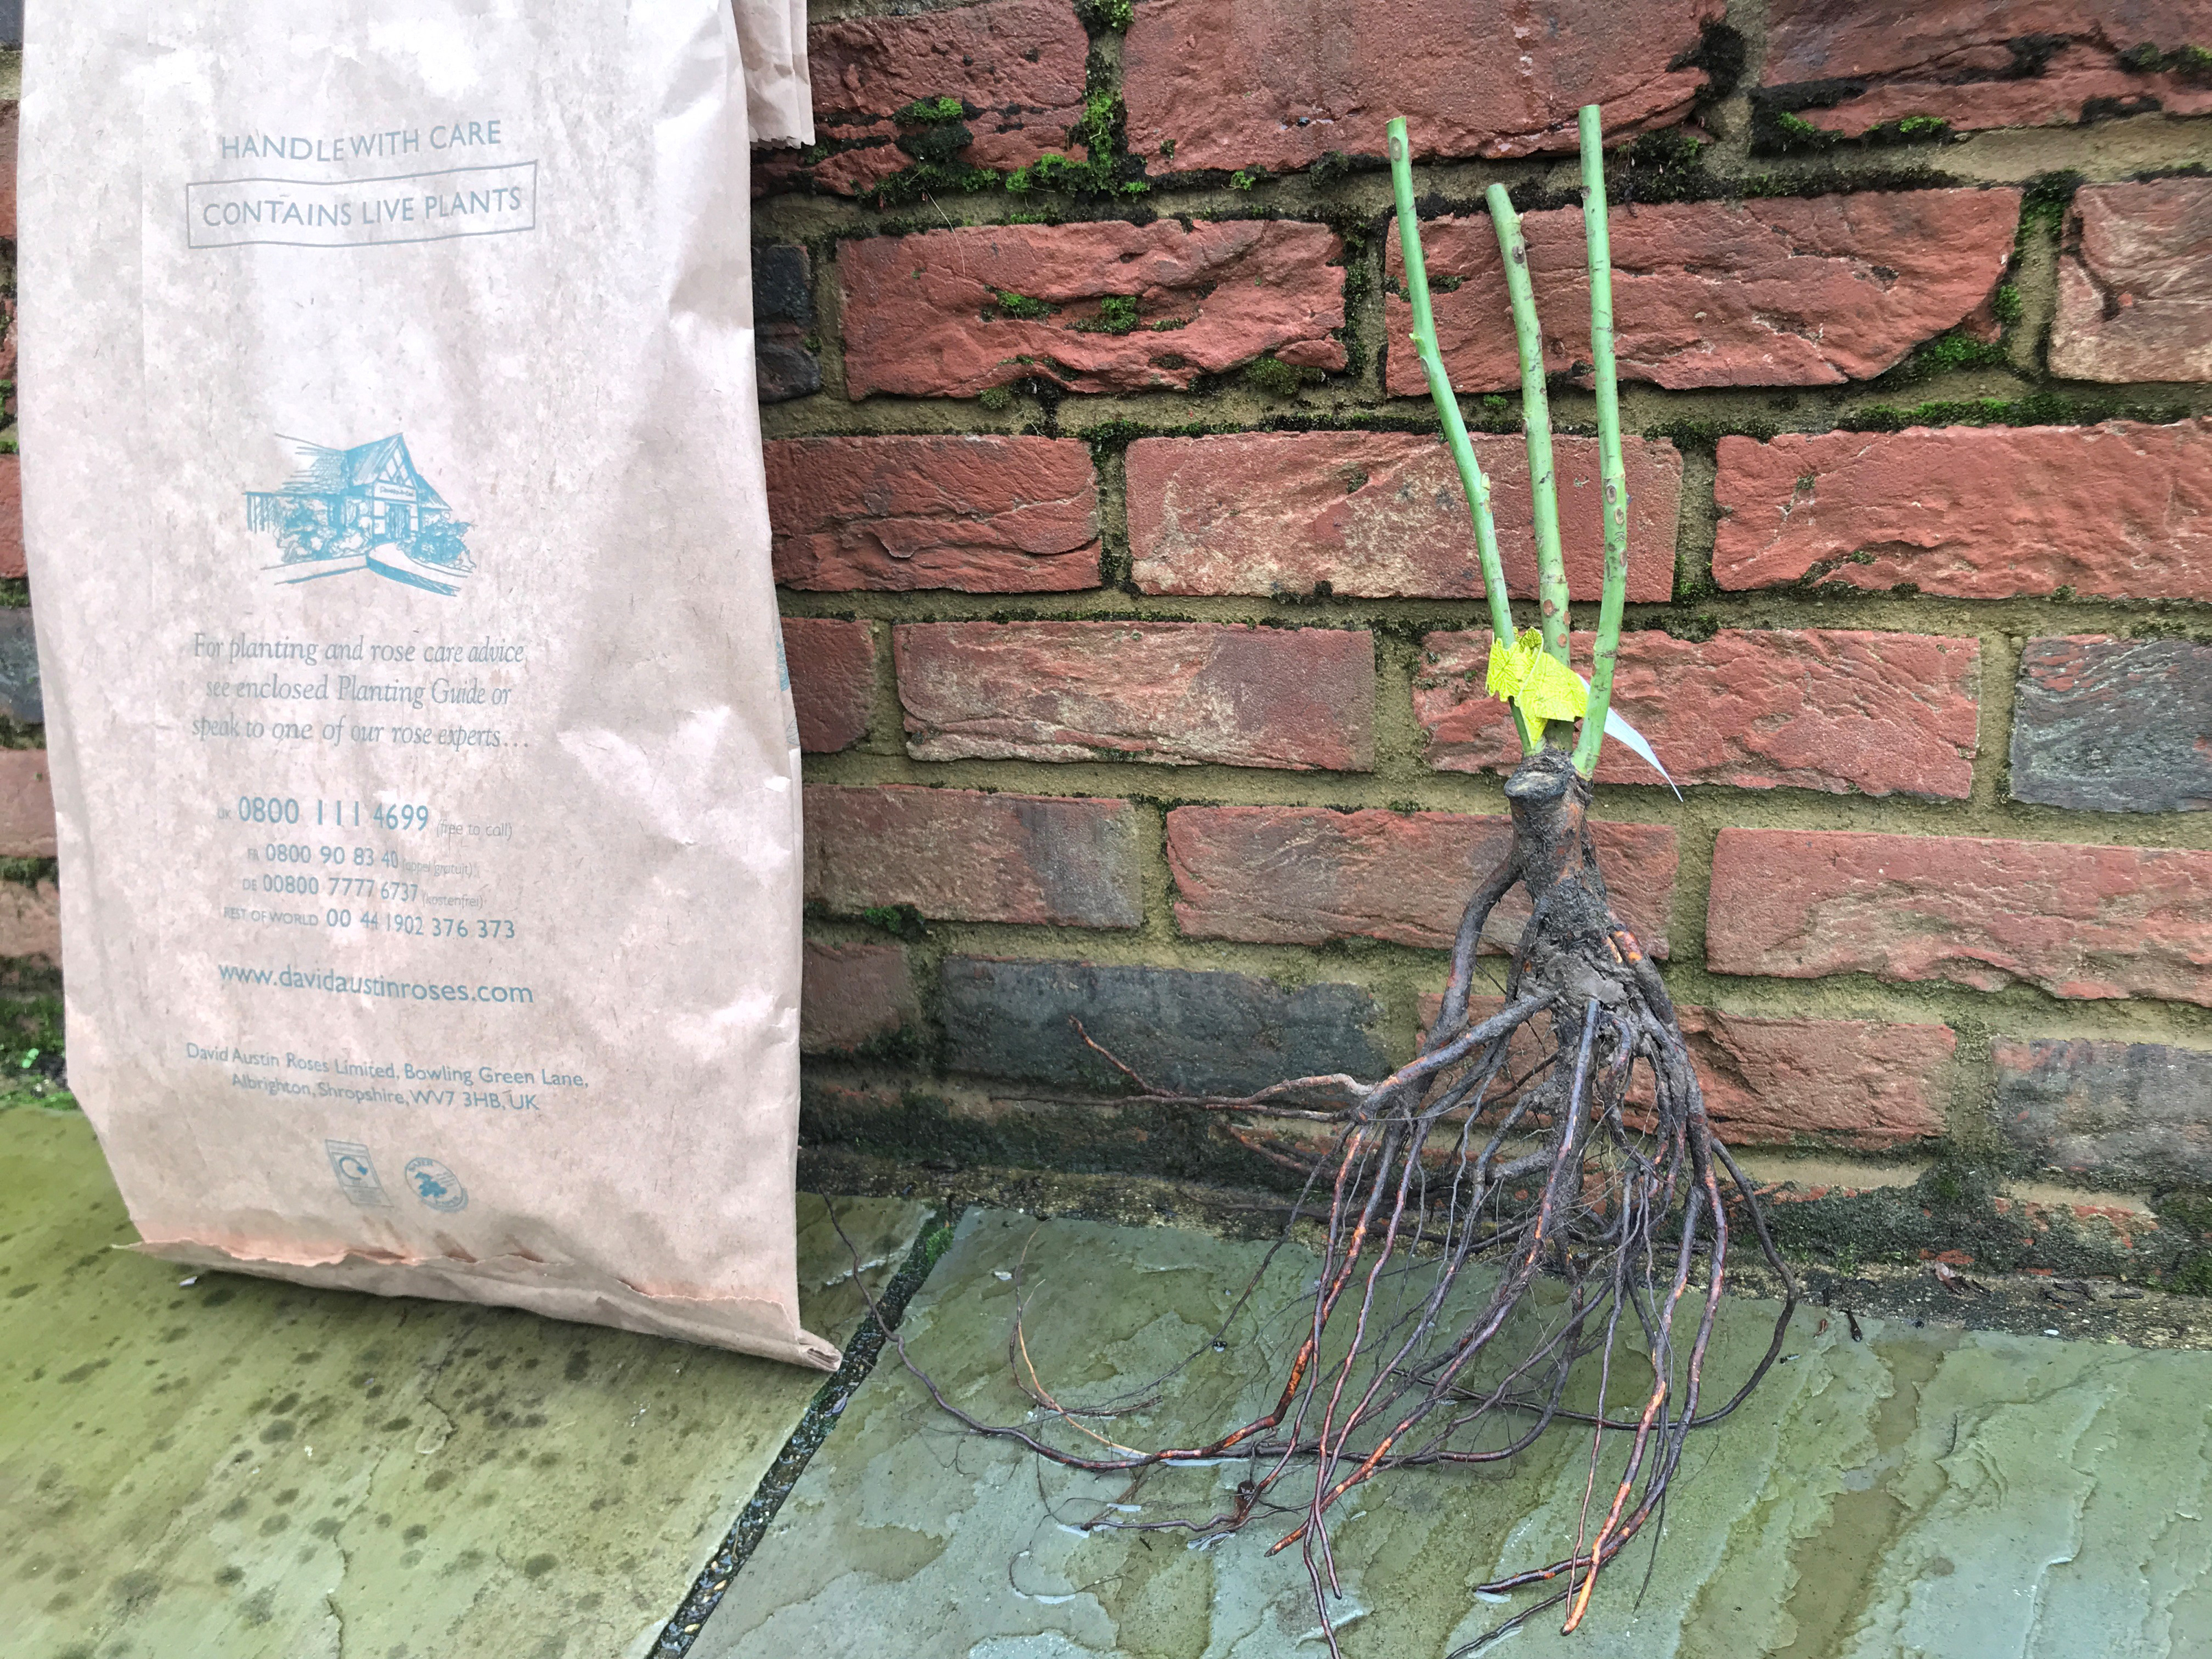 Bare root rose arrives in a bag (Hannah Stephenson/PA)